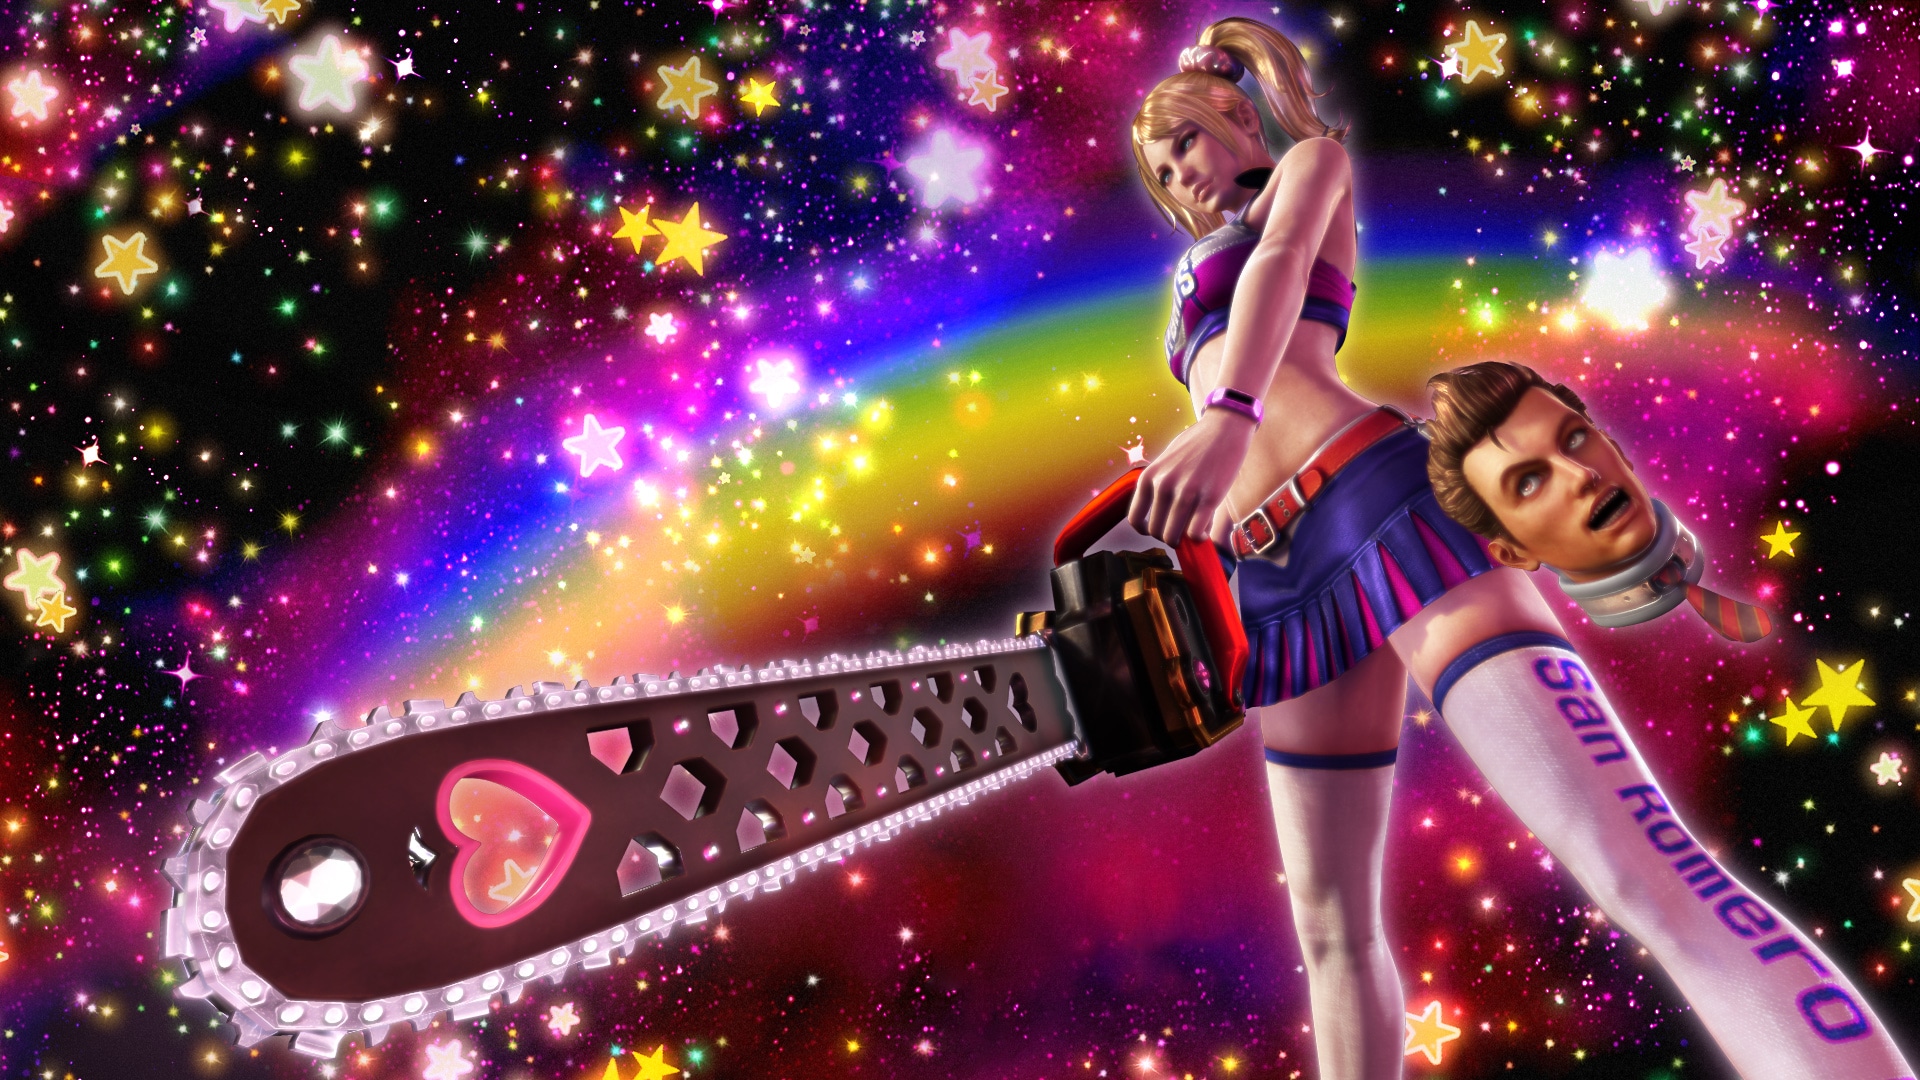 Lollipop Chainsaw Remake Announced, Promises A More Realistic